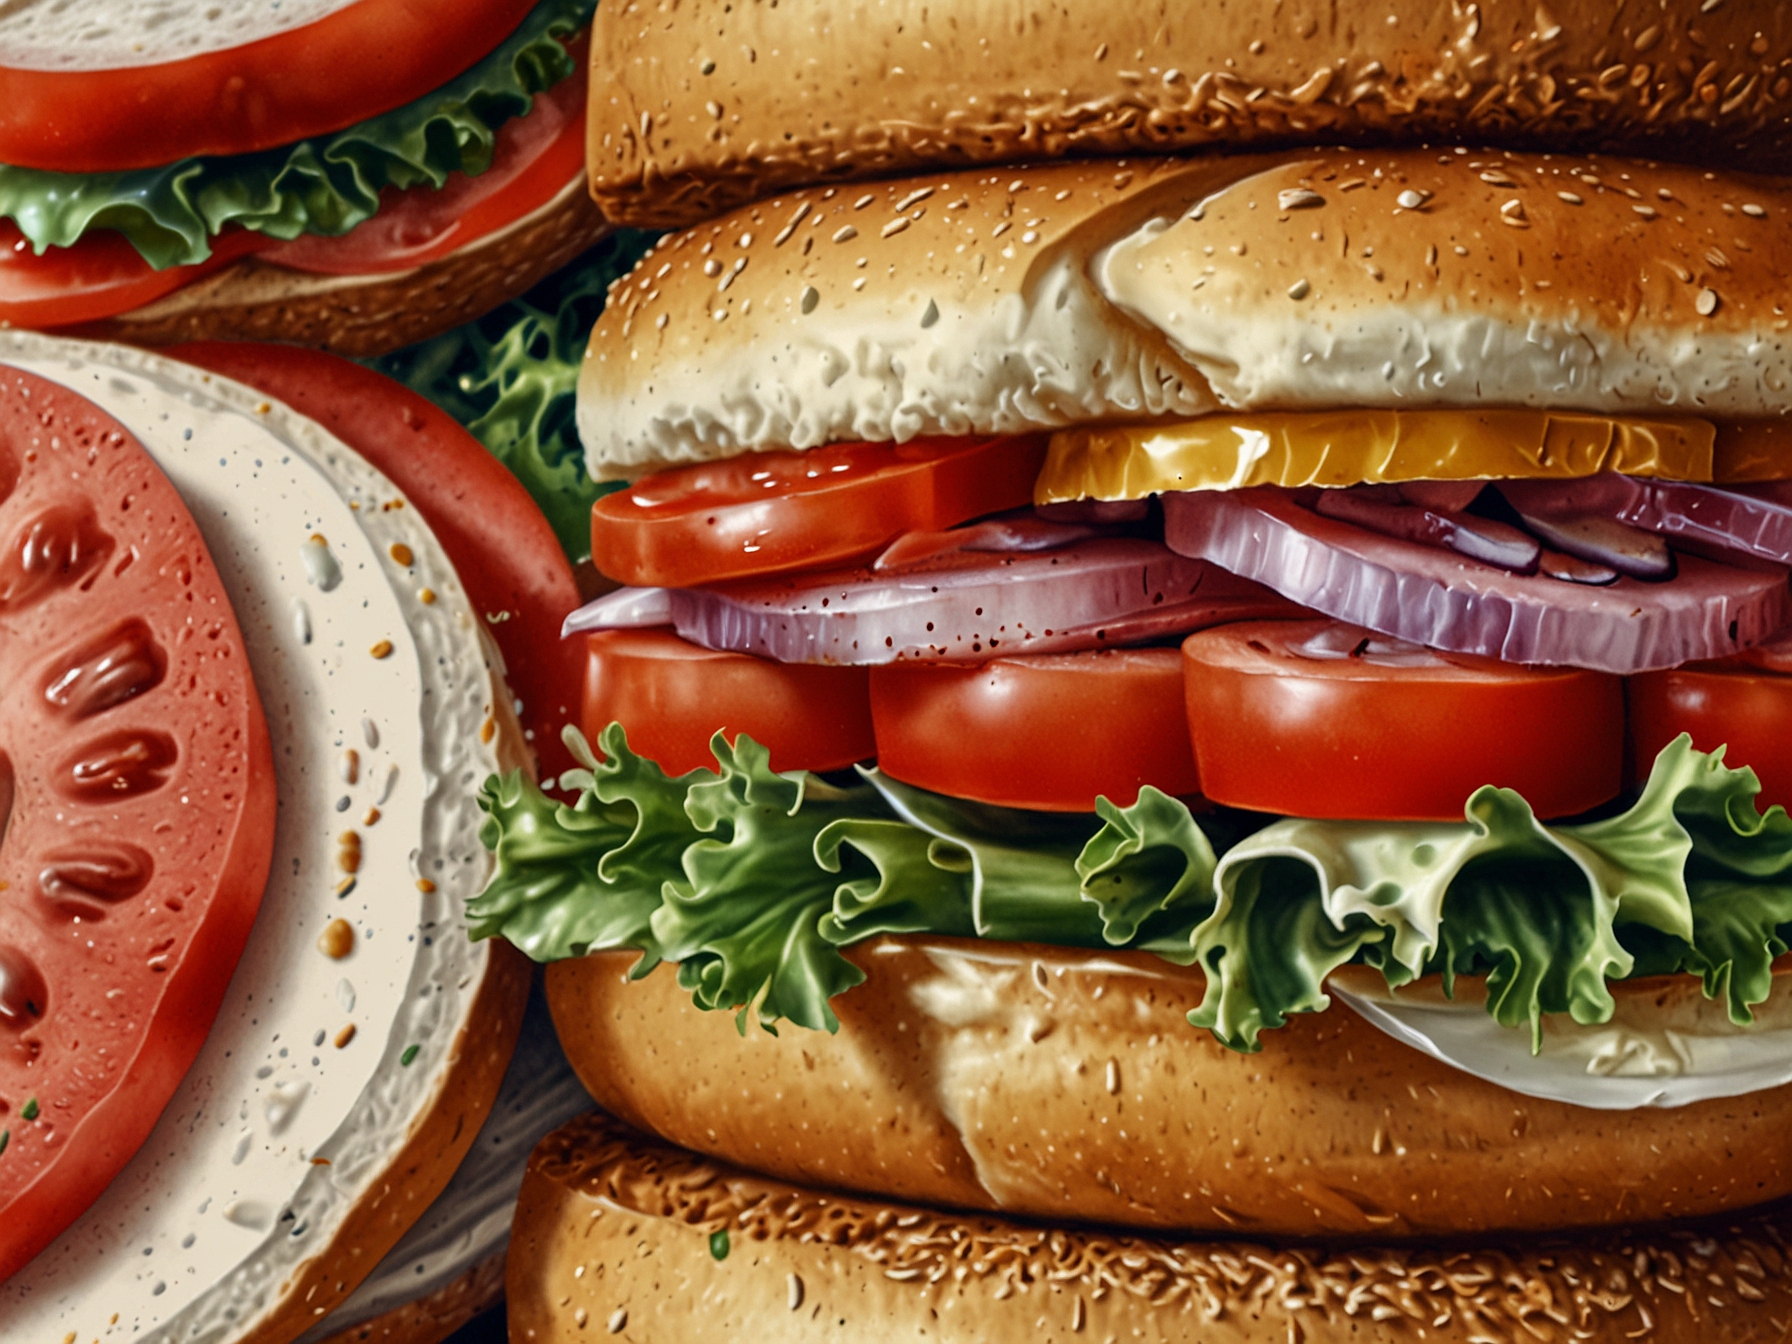 A close-up of a mouth-watering sandwich created by Owen Han, featuring vibrant and fresh ingredients.